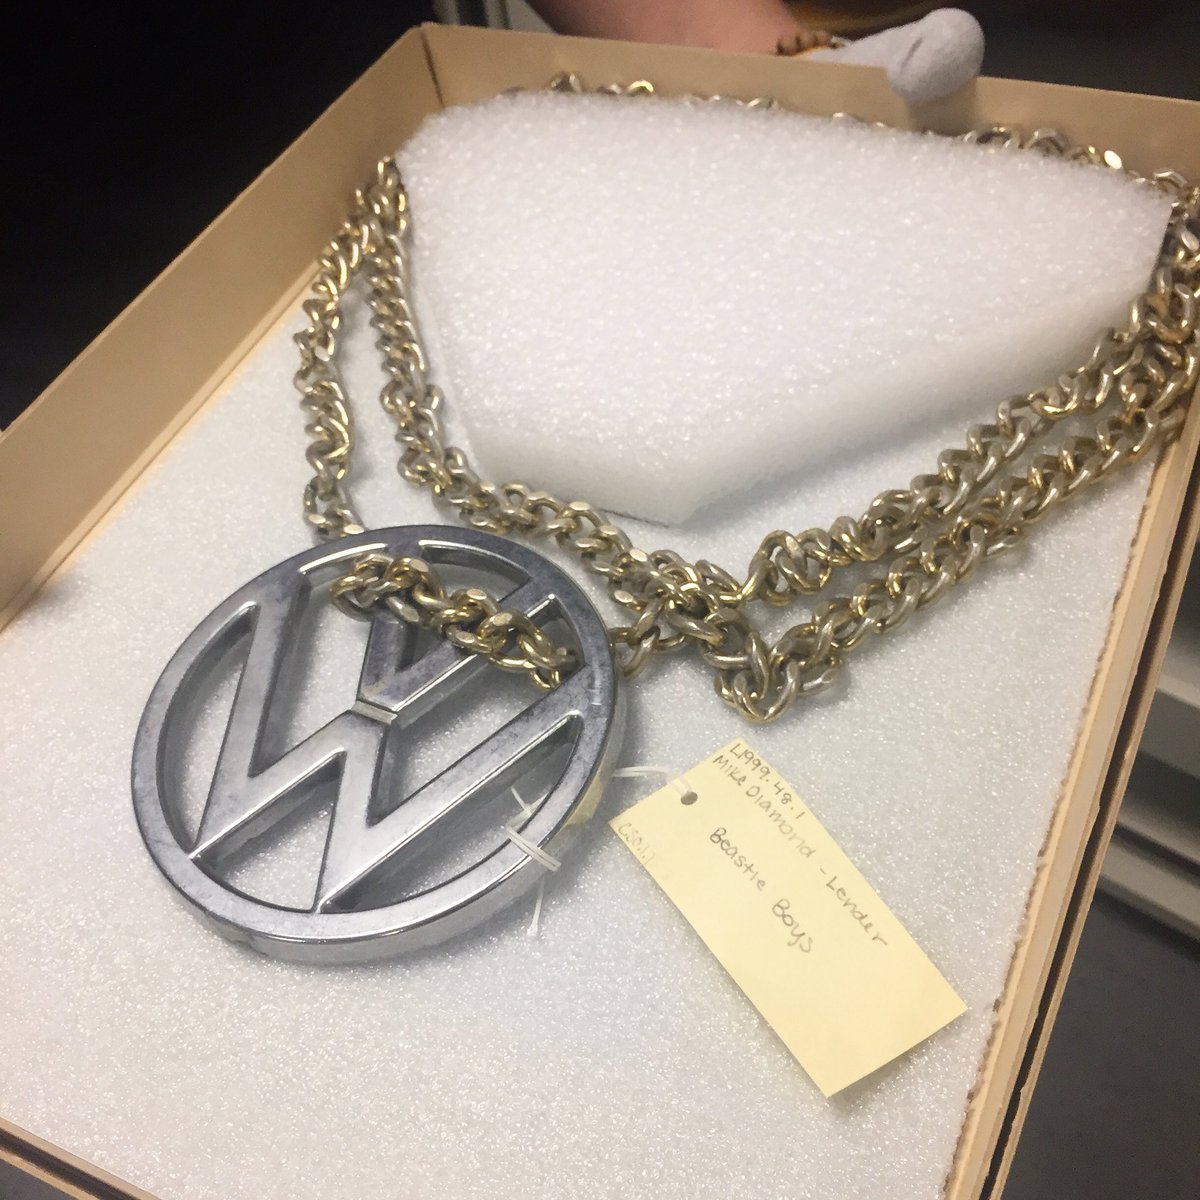 Mike D’s chain in the vaults of the @rockhall 

#fromthevault #beastieboys #miked #mca #adrock #rickrubin #defjam #creators #innovators #hiphop #hiphopculture #nychiphop #hiphopcollection #rocknrollhalloffamer #rocknrollhalloffame #rrhof  #musicculture #rebelwithoutapause #noise